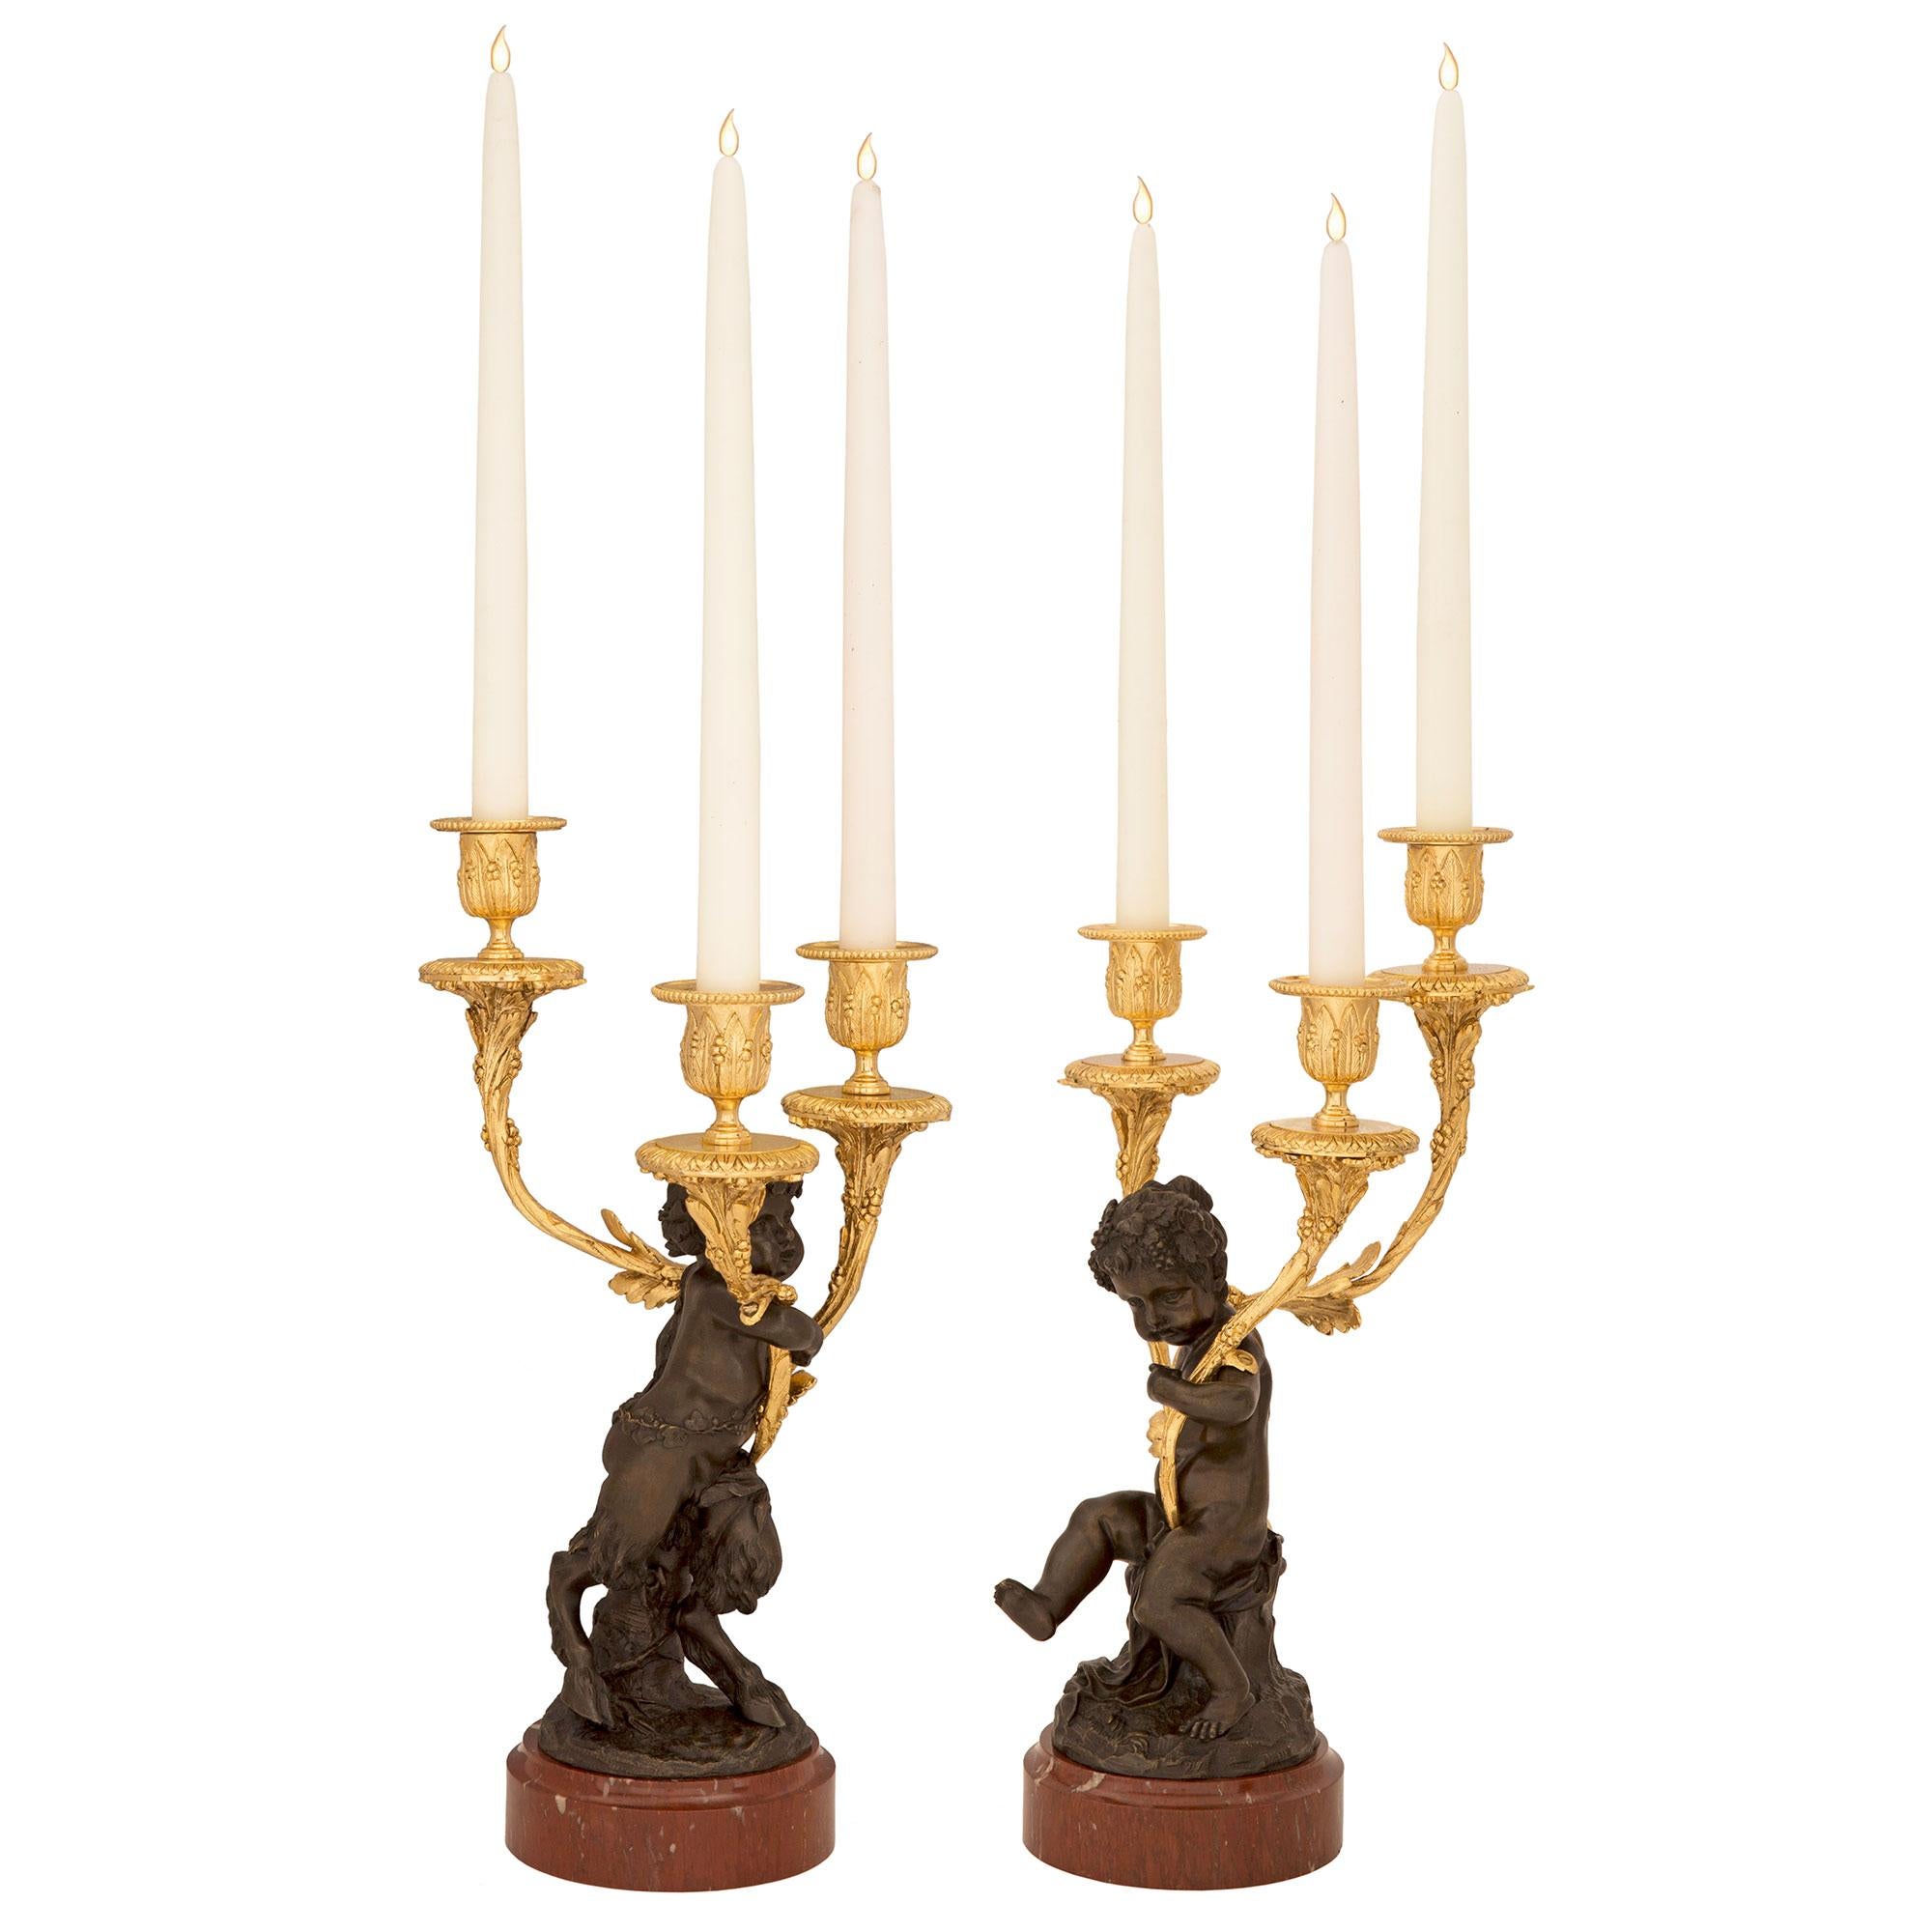 A beautiful and high quality true pair of French 19th century Louis XVI st. ormolu, patinated bronze and Rouge Griotte marble candelabras, attributed to Clodion. Each candelabra is raised by an elegant circular Rouge Griotte marble base with a fine